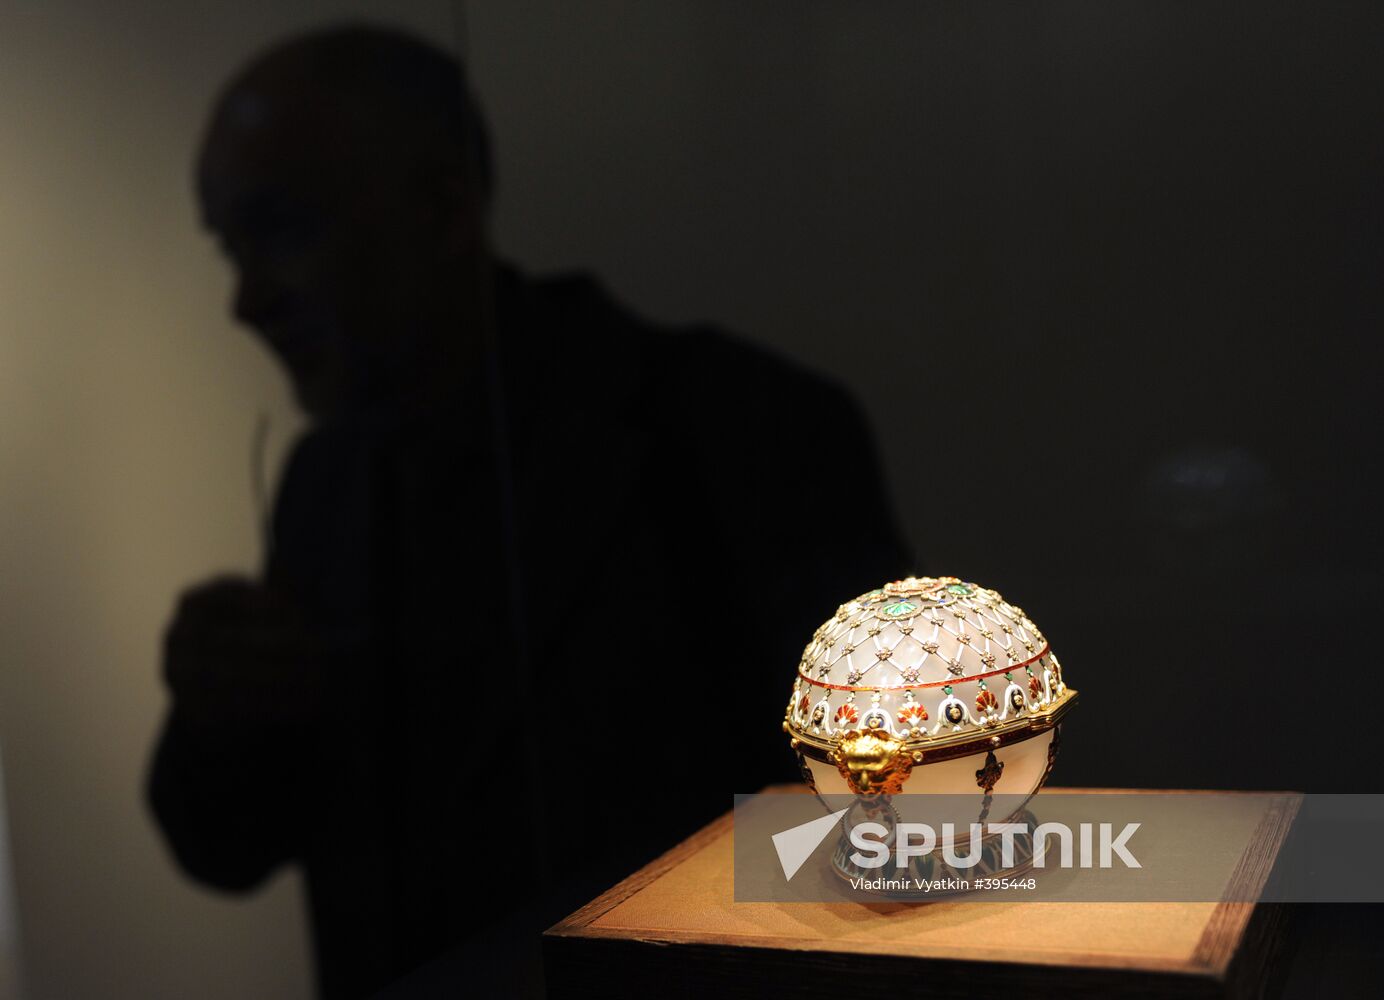 "Fabergé. Lost and Regained" exhibition opens